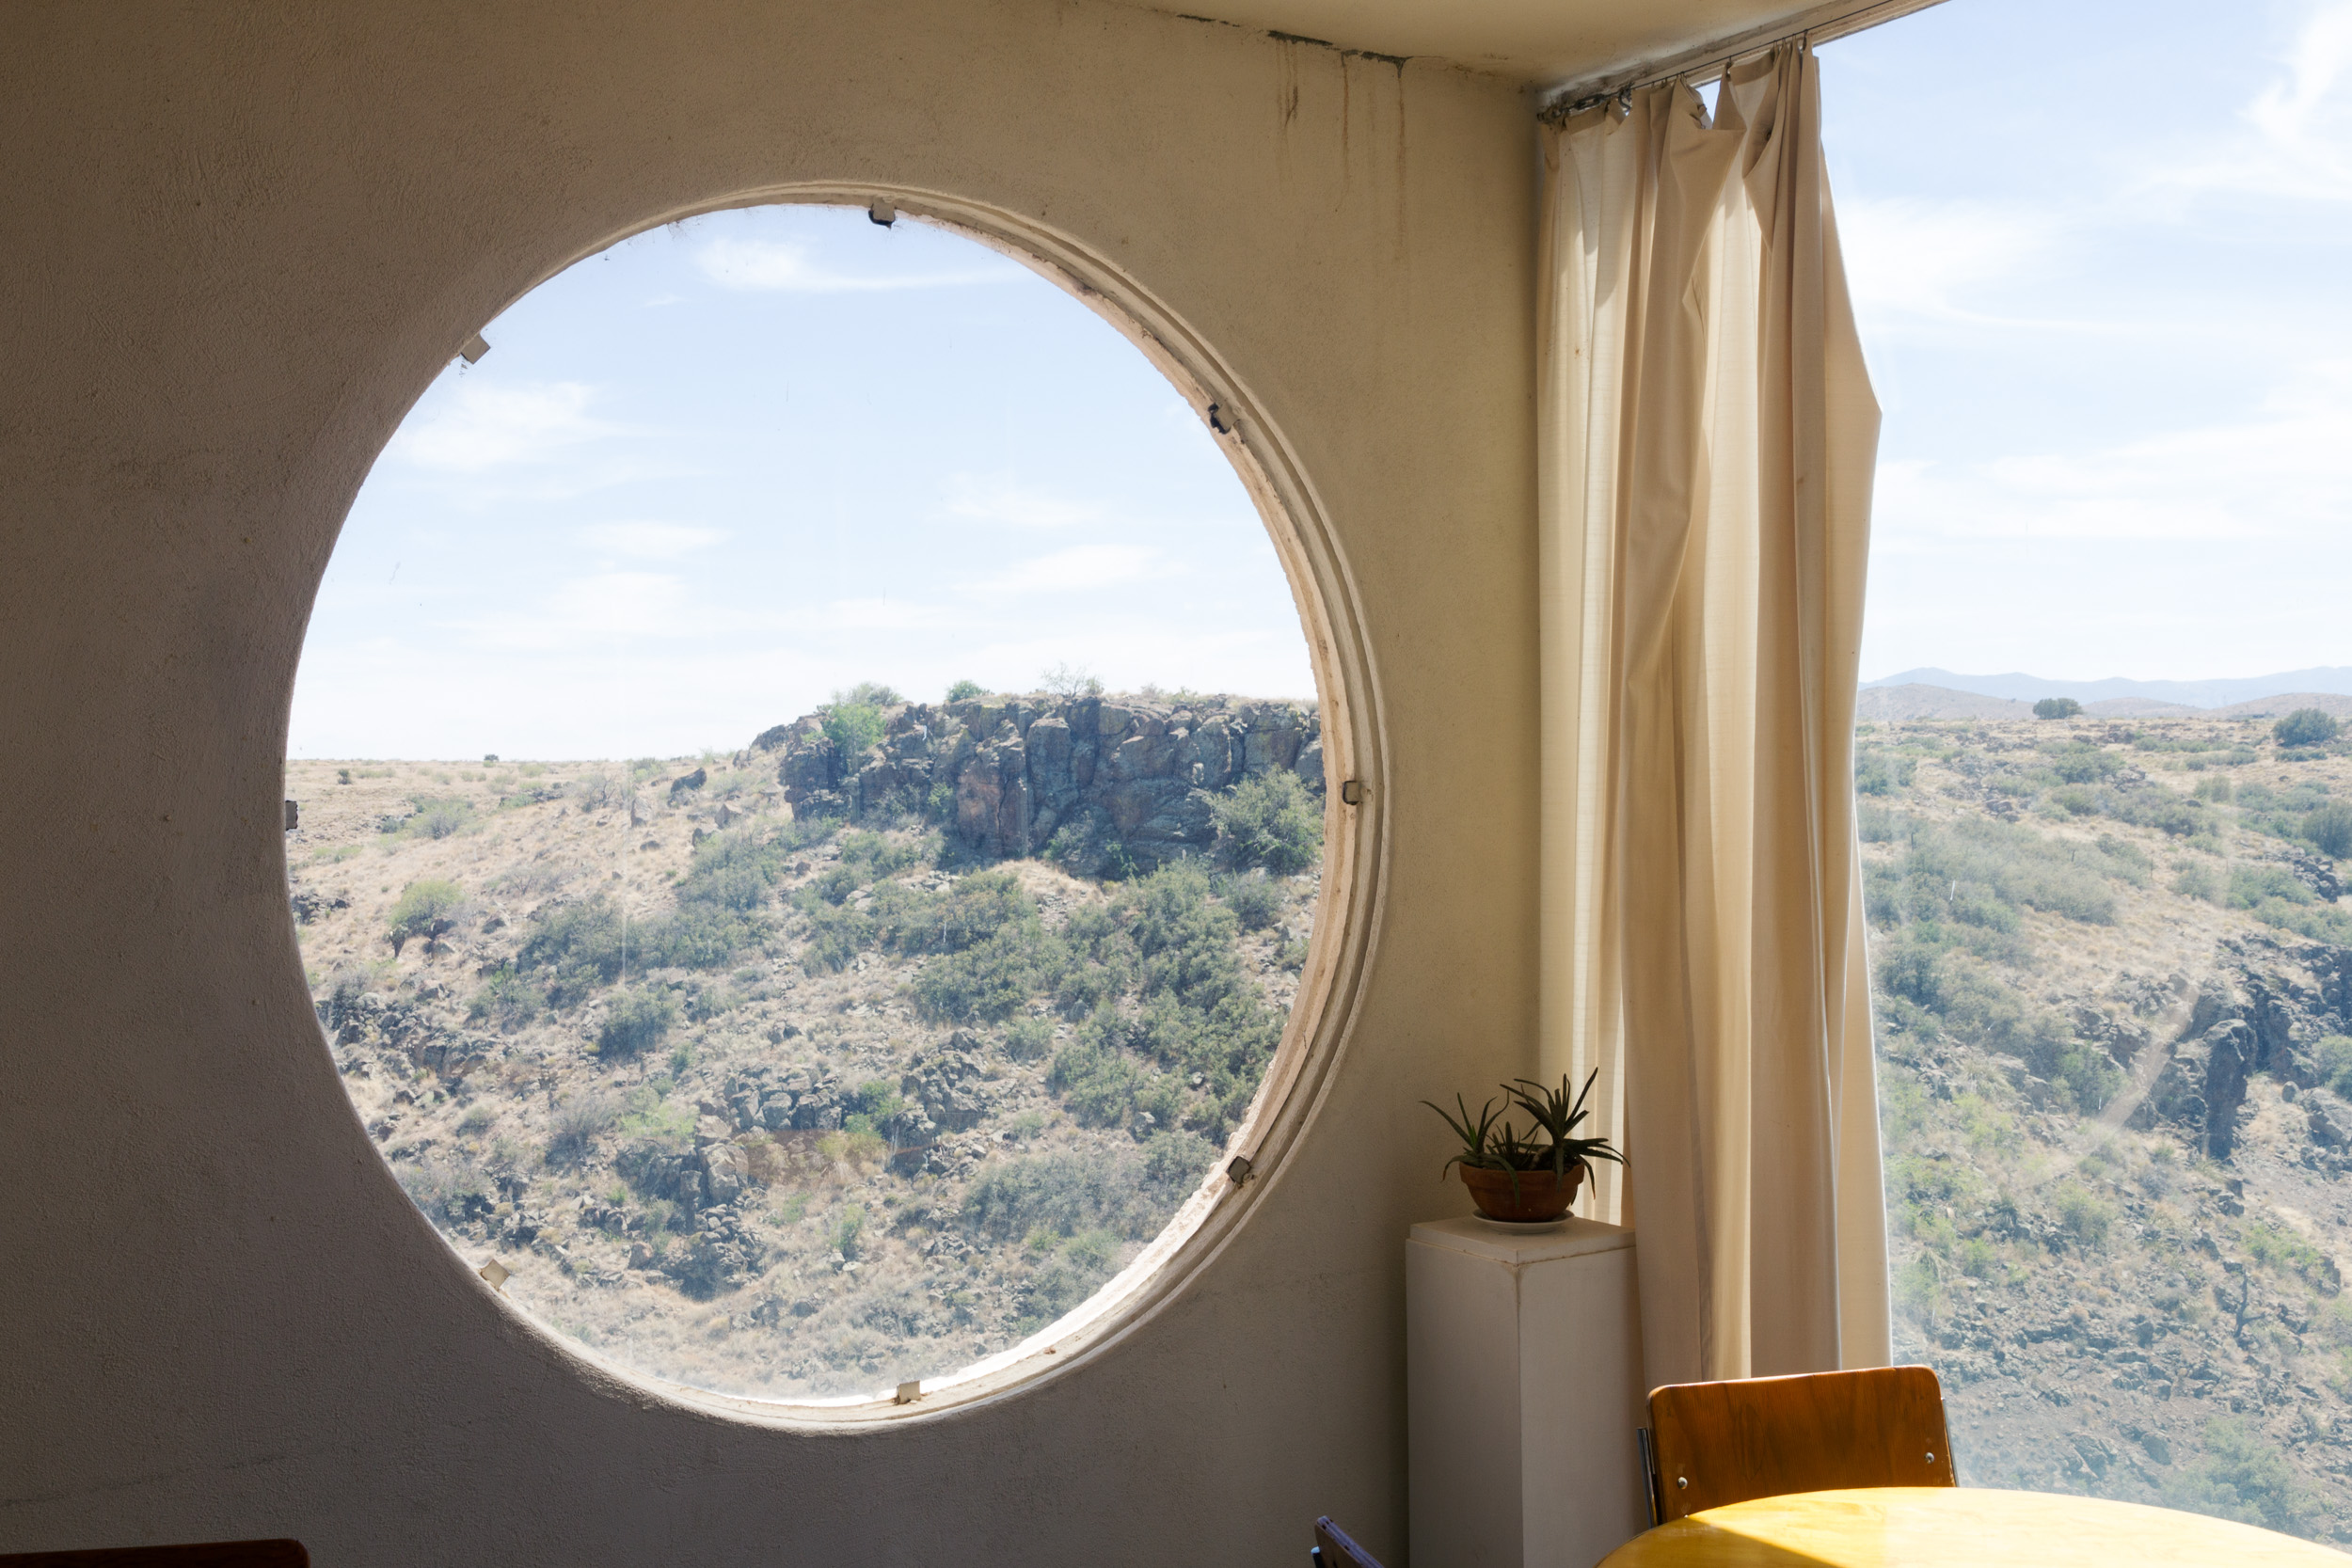  Arcosanti, photographed for Scottsdale Museum of Contemporary Art 